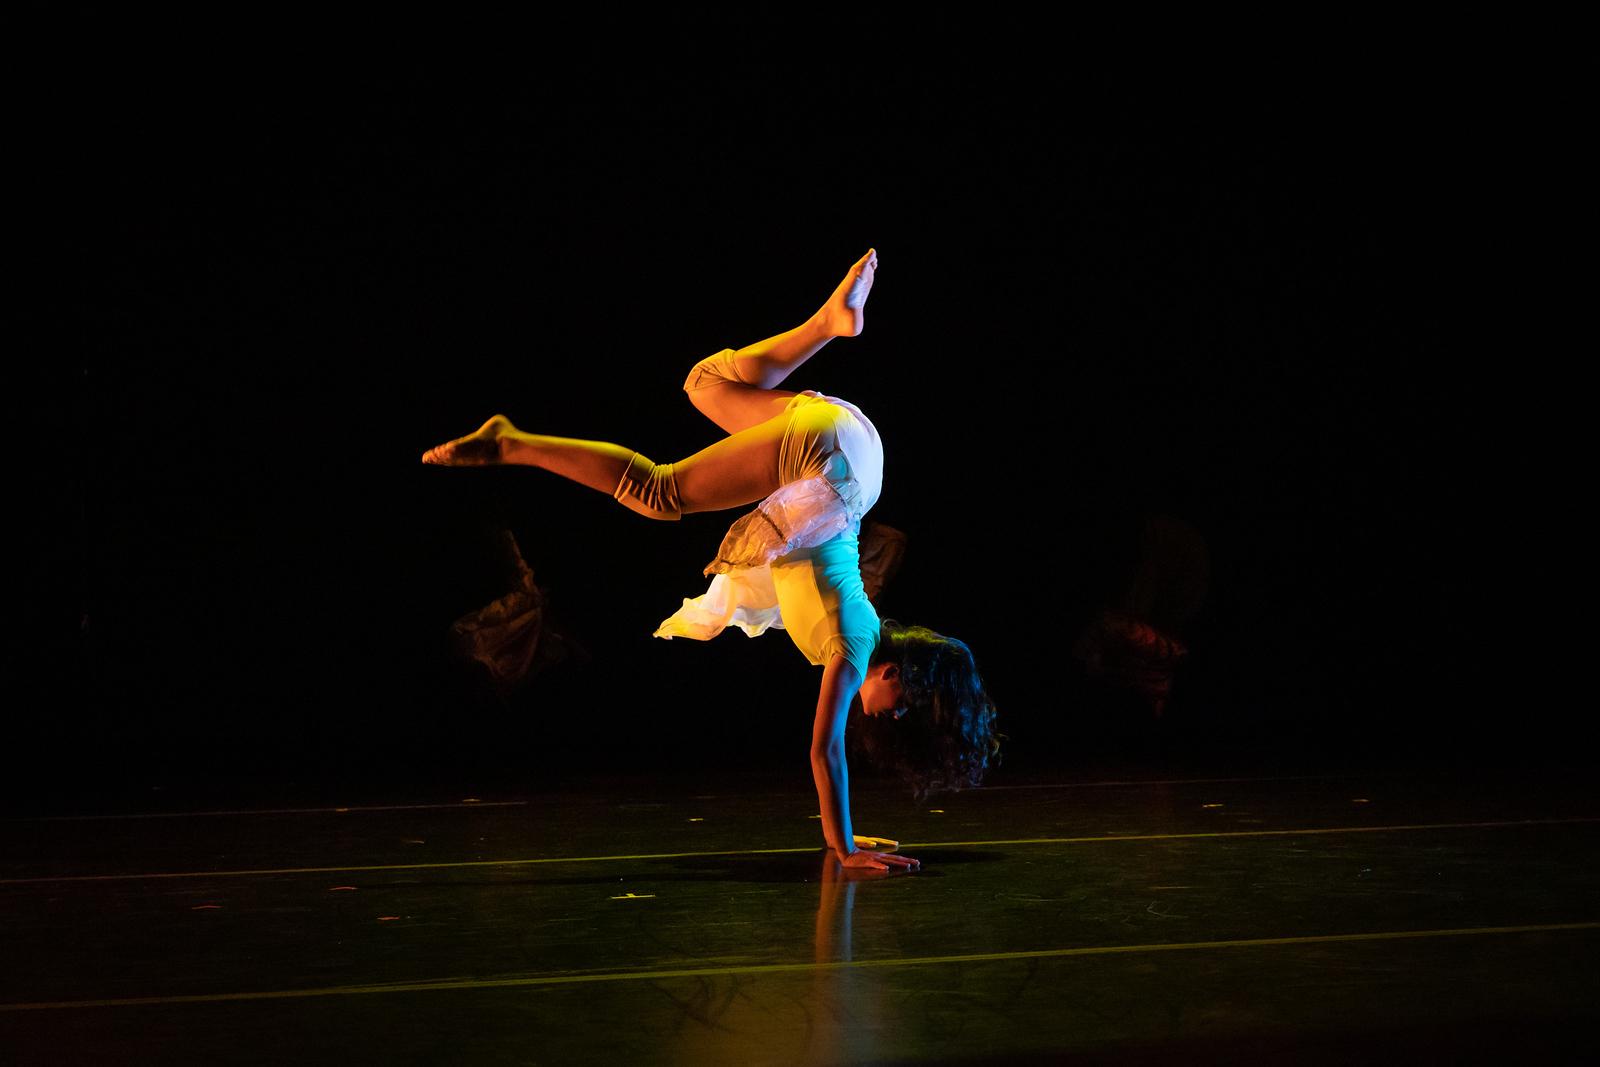 A dancer poses with their legs in the air